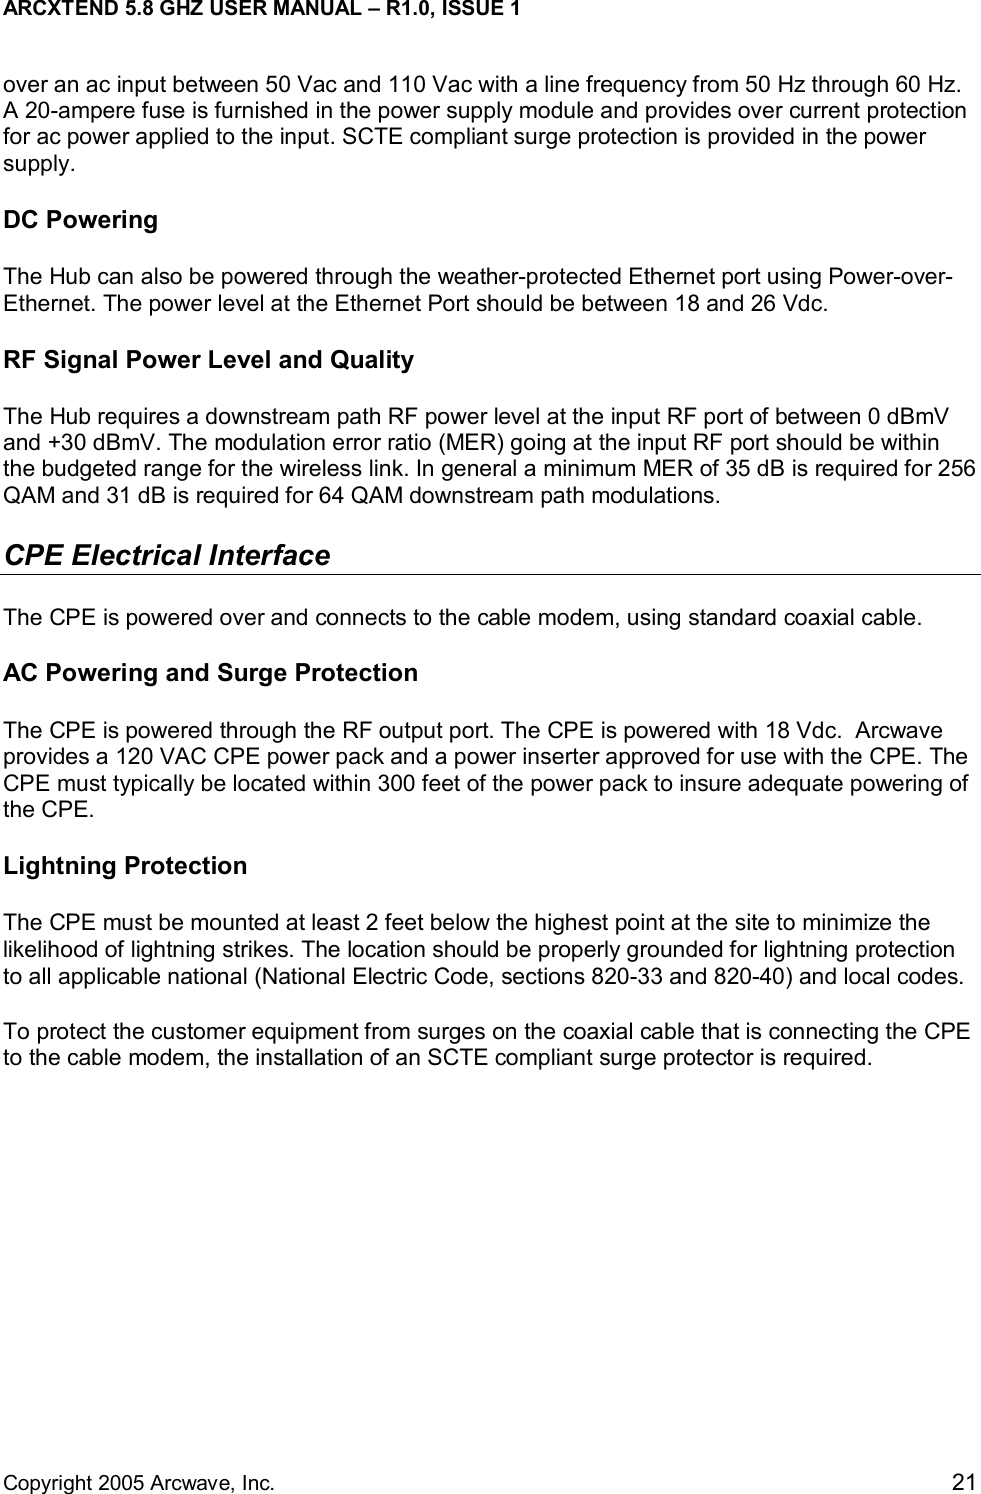 ARCXTEND 5.8 GHZ USER MANUAL – R1.0, ISSUE 1  Copyright 2005 Arcwave, Inc.    21 over an ac input between 50 Vac and 110 Vac with a line frequency from 50 Hz through 60 Hz. A 20-ampere fuse is furnished in the power supply module and provides over current protection for ac power applied to the input. SCTE compliant surge protection is provided in the power supply. DC Powering The Hub can also be powered through the weather-protected Ethernet port using Power-over-Ethernet. The power level at the Ethernet Port should be between 18 and 26 Vdc.  RF Signal Power Level and Quality The Hub requires a downstream path RF power level at the input RF port of between 0 dBmV and +30 dBmV. The modulation error ratio (MER) going at the input RF port should be within the budgeted range for the wireless link. In general a minimum MER of 35 dB is required for 256 QAM and 31 dB is required for 64 QAM downstream path modulations. CPE Electrical Interface The CPE is powered over and connects to the cable modem, using standard coaxial cable.  AC Powering and Surge Protection The CPE is powered through the RF output port. The CPE is powered with 18 Vdc.  Arcwave provides a 120 VAC CPE power pack and a power inserter approved for use with the CPE. The CPE must typically be located within 300 feet of the power pack to insure adequate powering of the CPE.  Lightning Protection The CPE must be mounted at least 2 feet below the highest point at the site to minimize the likelihood of lightning strikes. The location should be properly grounded for lightning protection to all applicable national (National Electric Code, sections 820-33 and 820-40) and local codes.  To protect the customer equipment from surges on the coaxial cable that is connecting the CPE to the cable modem, the installation of an SCTE compliant surge protector is required.  